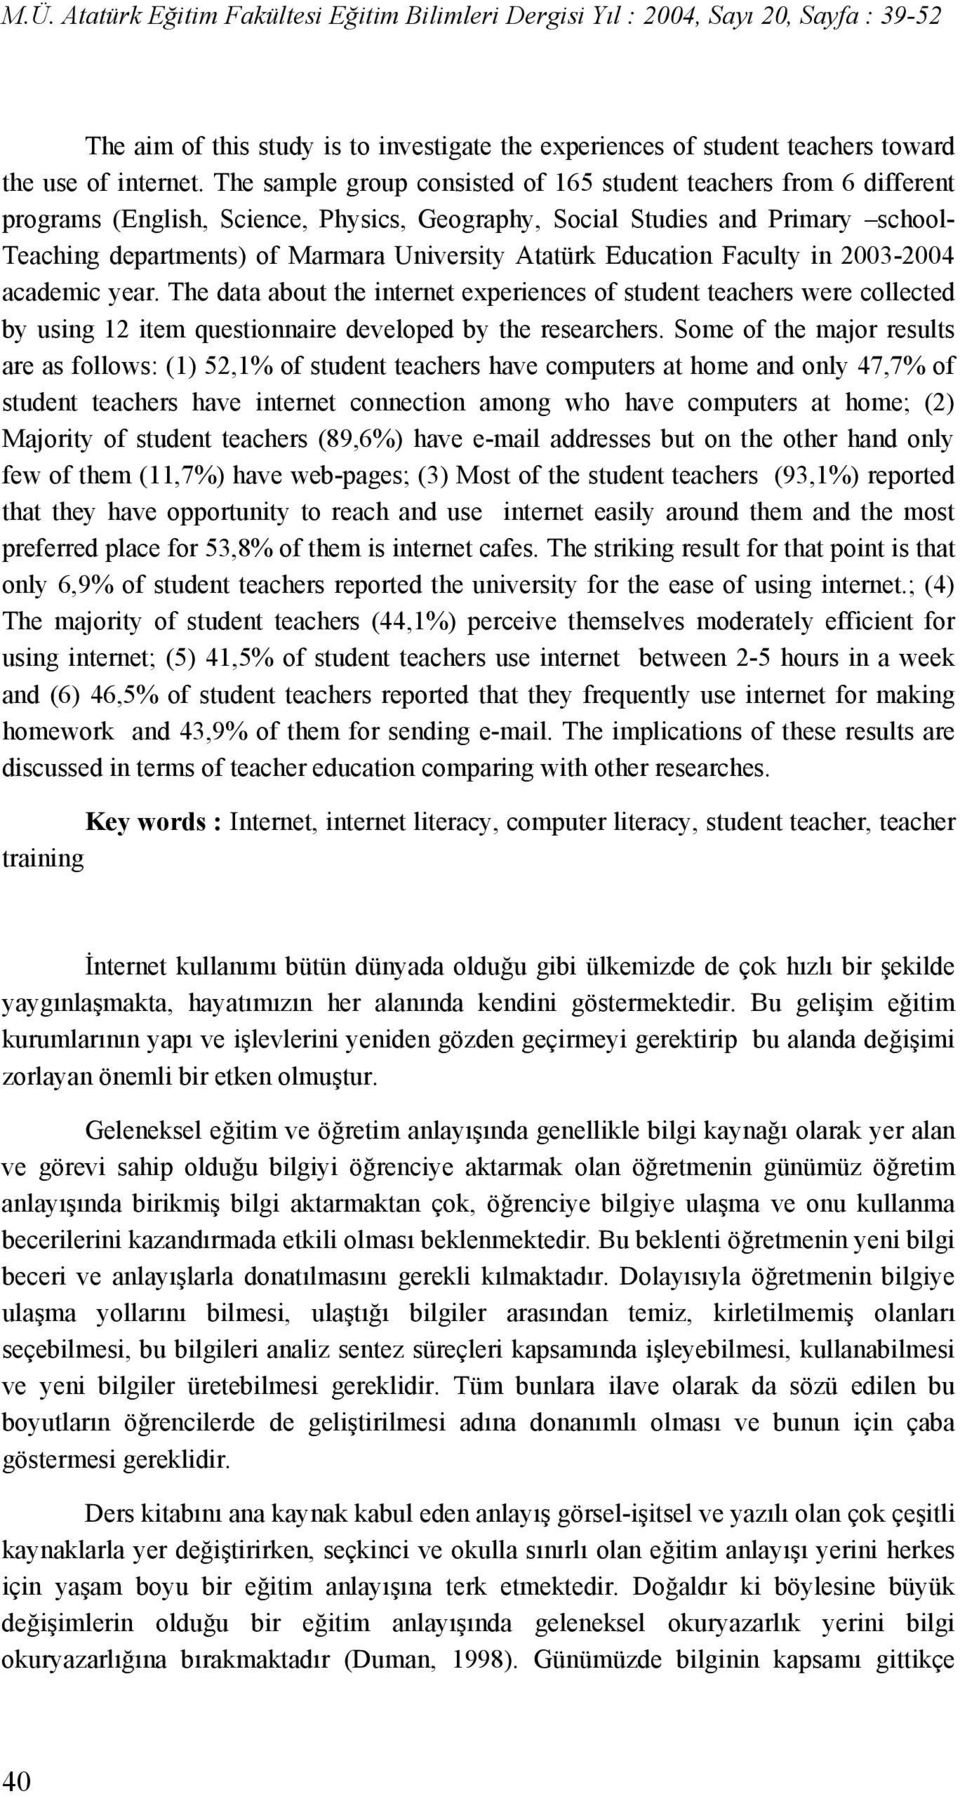 Atatürk Education Faculty in 2003-2004 academic year. The data about the internet experiences of student teachers were collected by using 12 item questionnaire developed by the researchers.